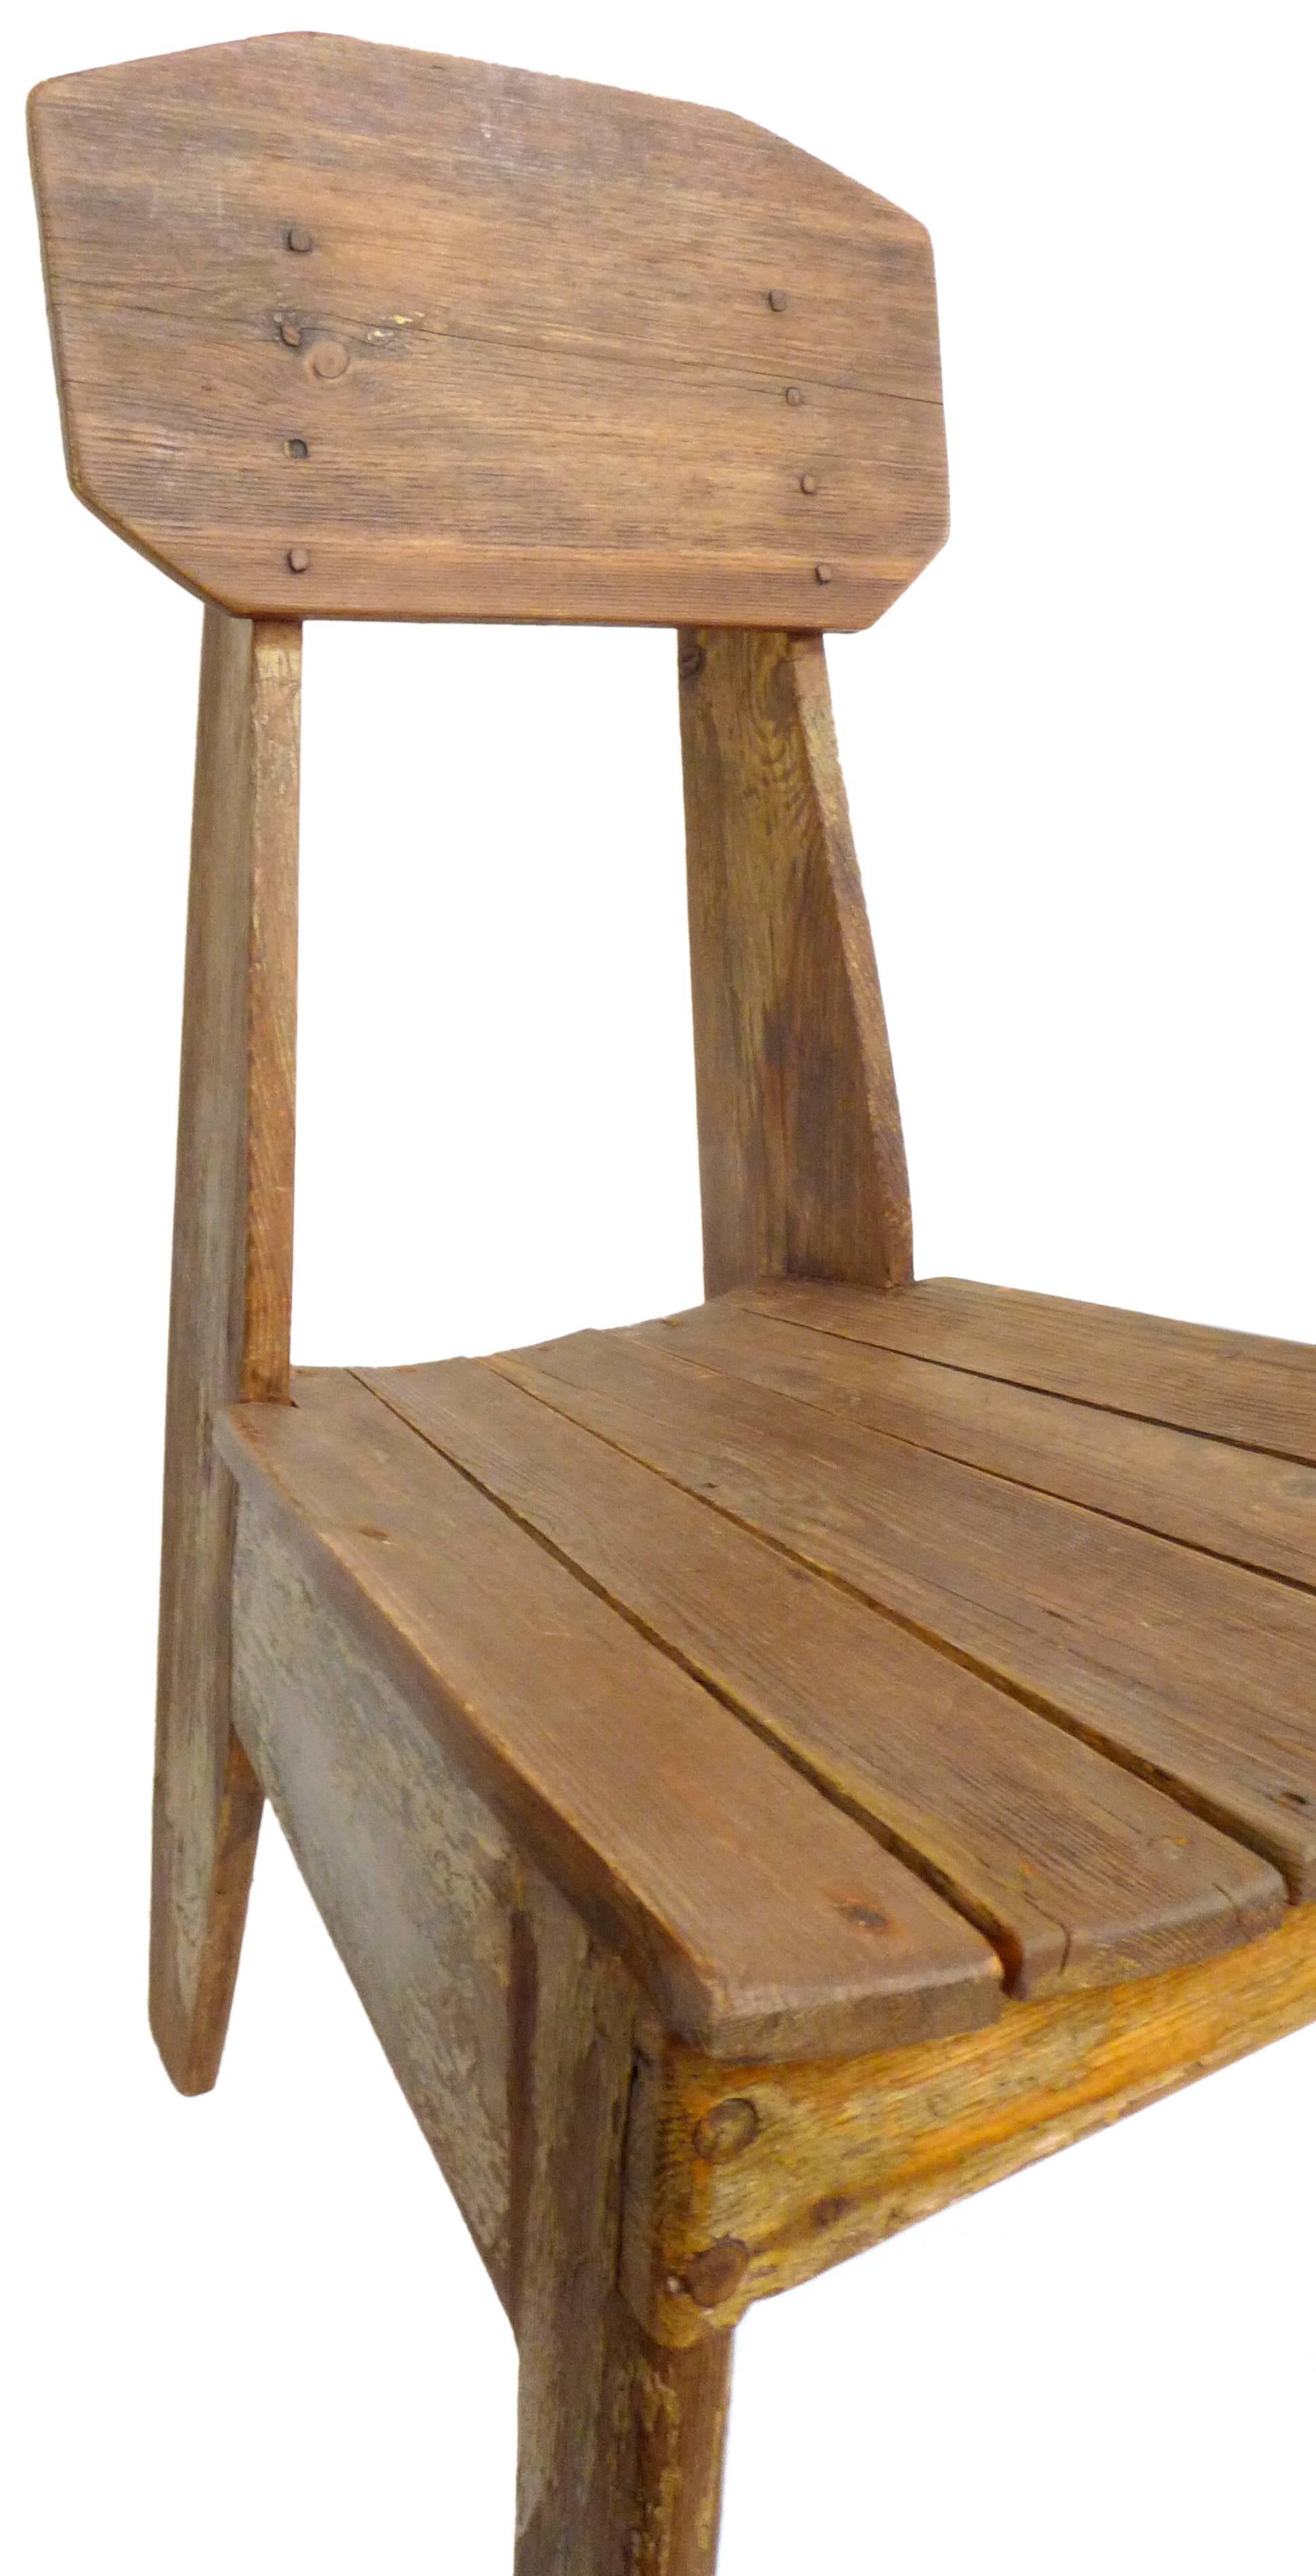 Mid-20th Century Modernist Slatted-Wood Side Chair For Sale